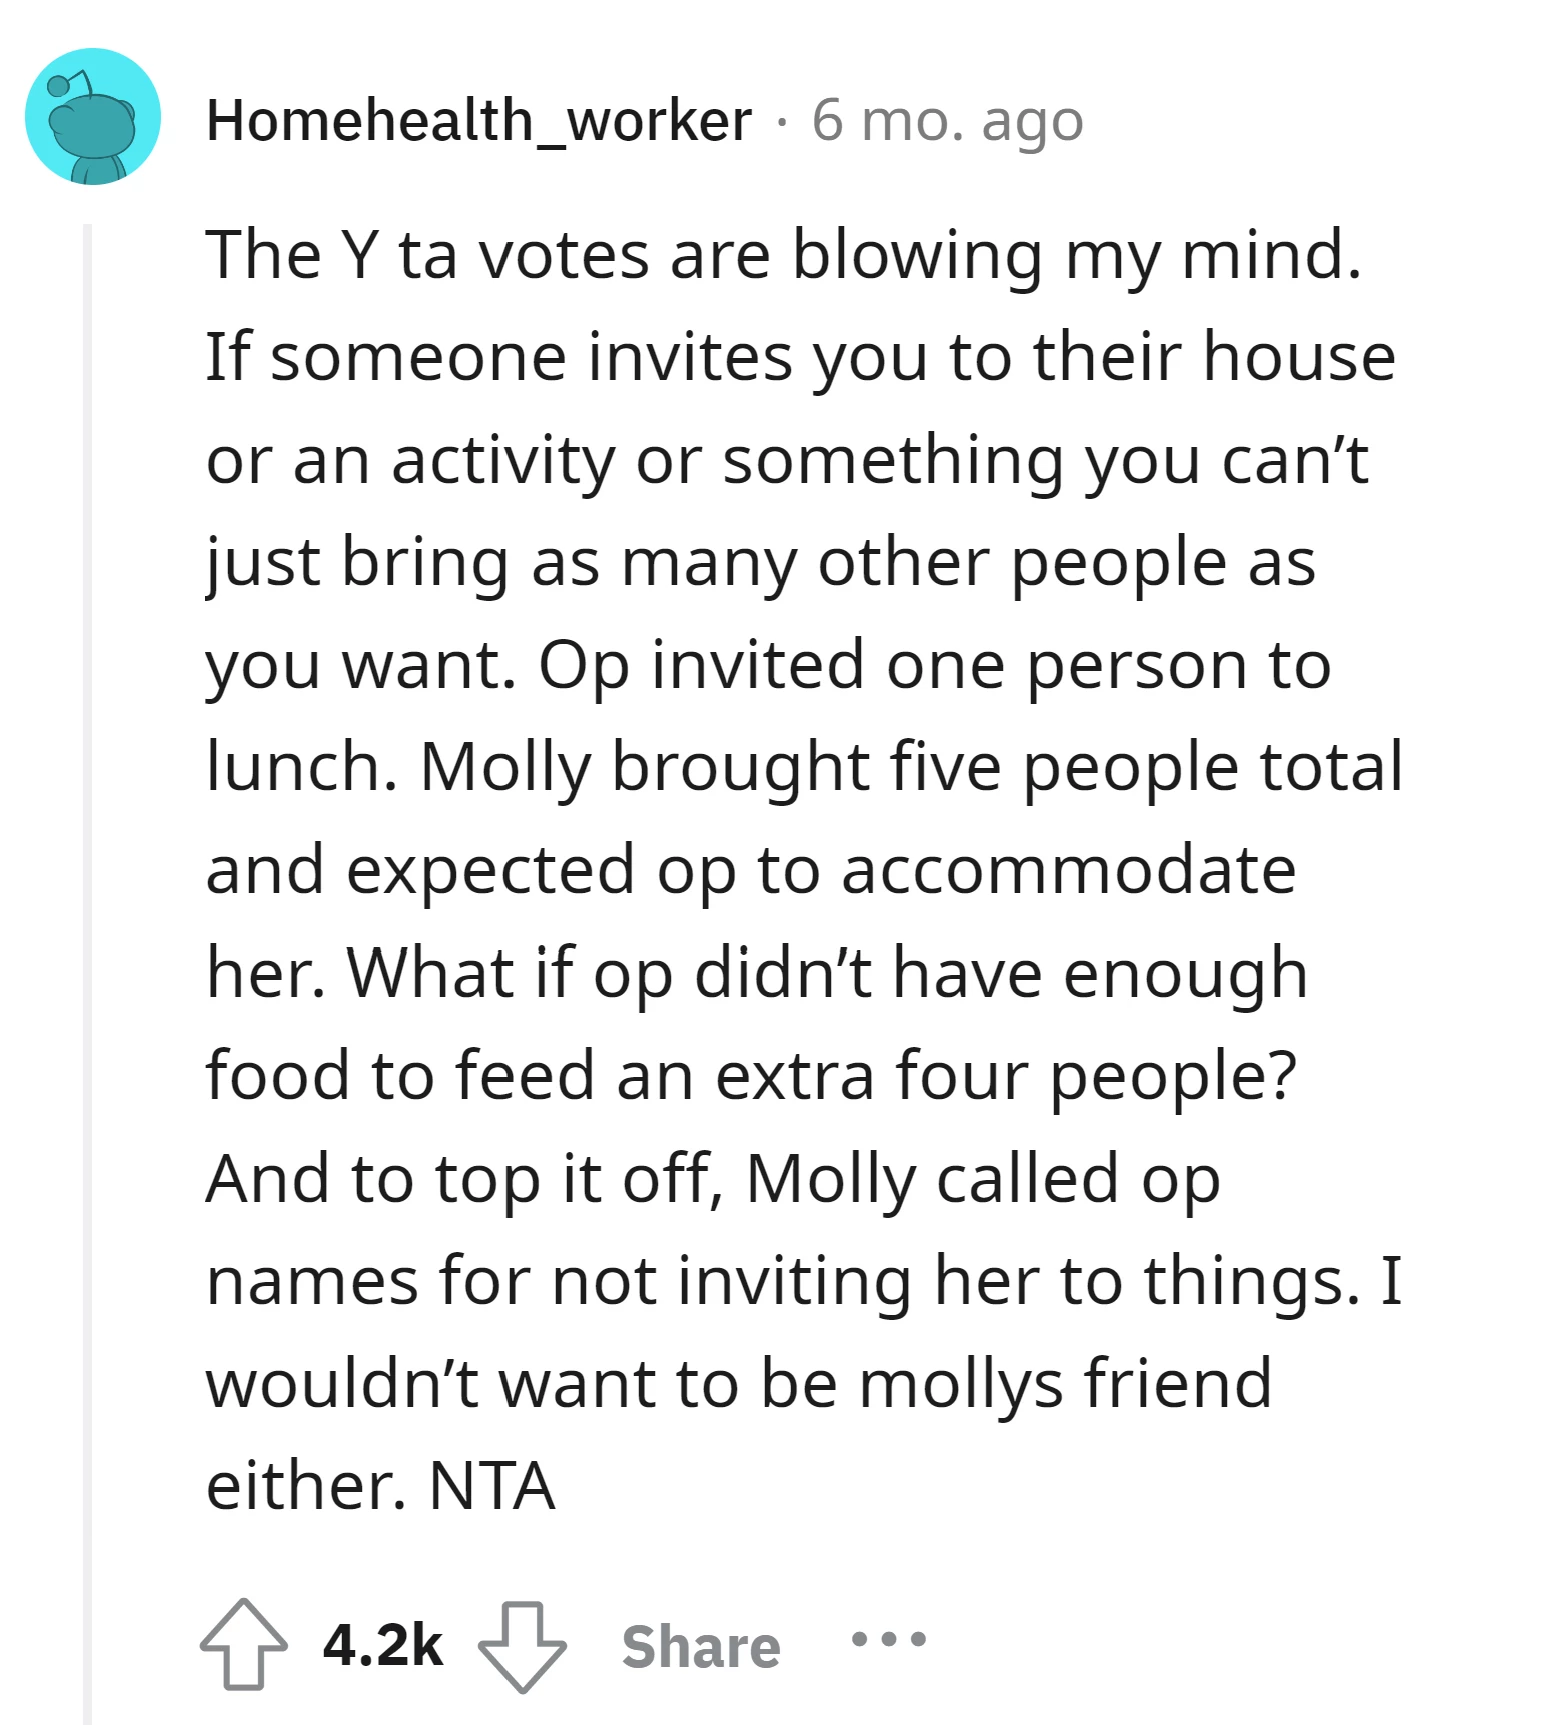 OP's New Neighbor Should Have At Least Asked First